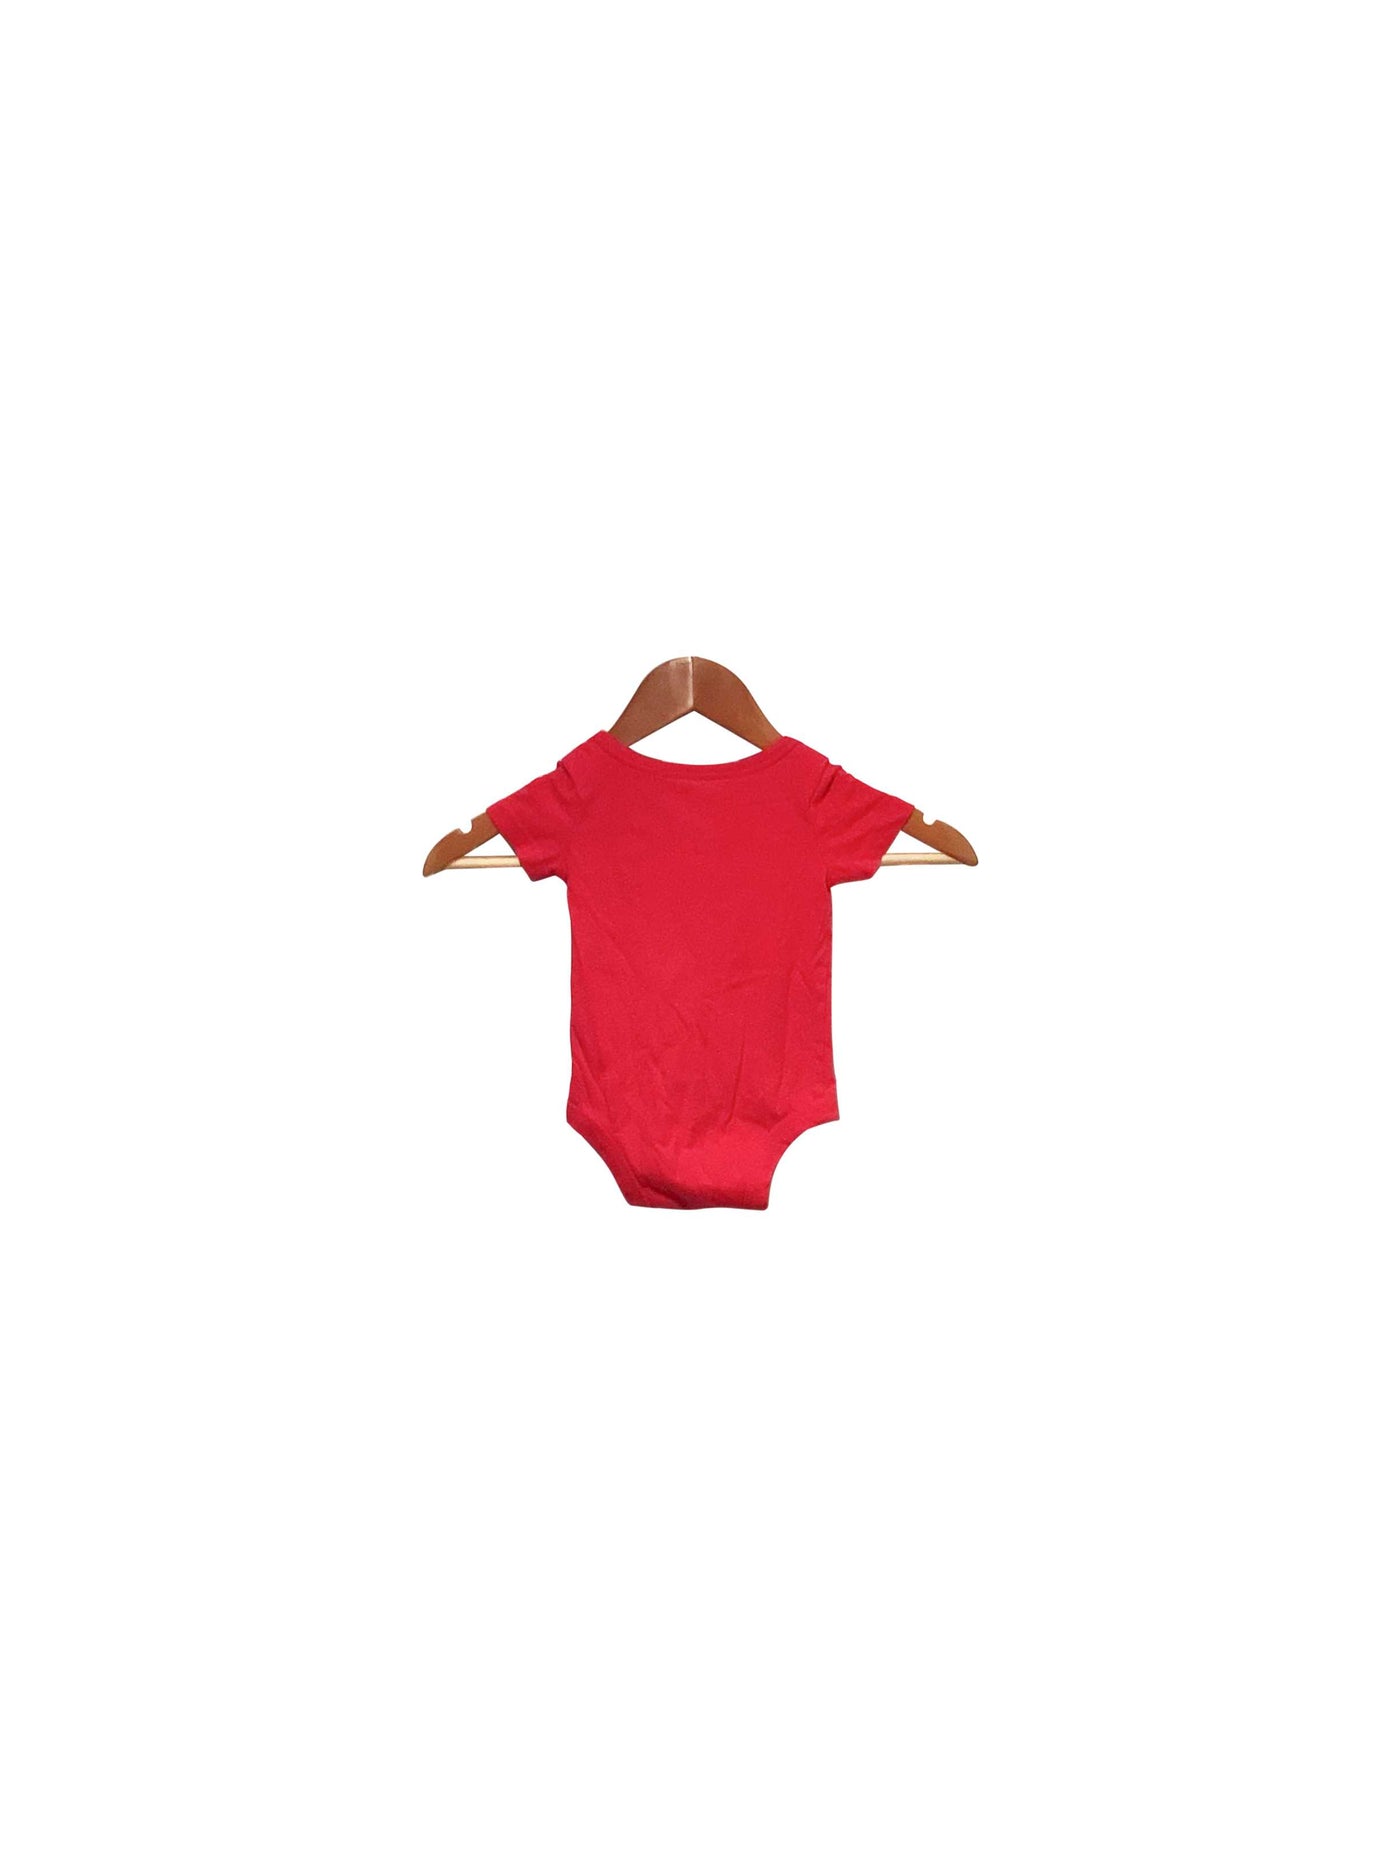 GEORGE Regular fit Overalls in Red  -  3-6M